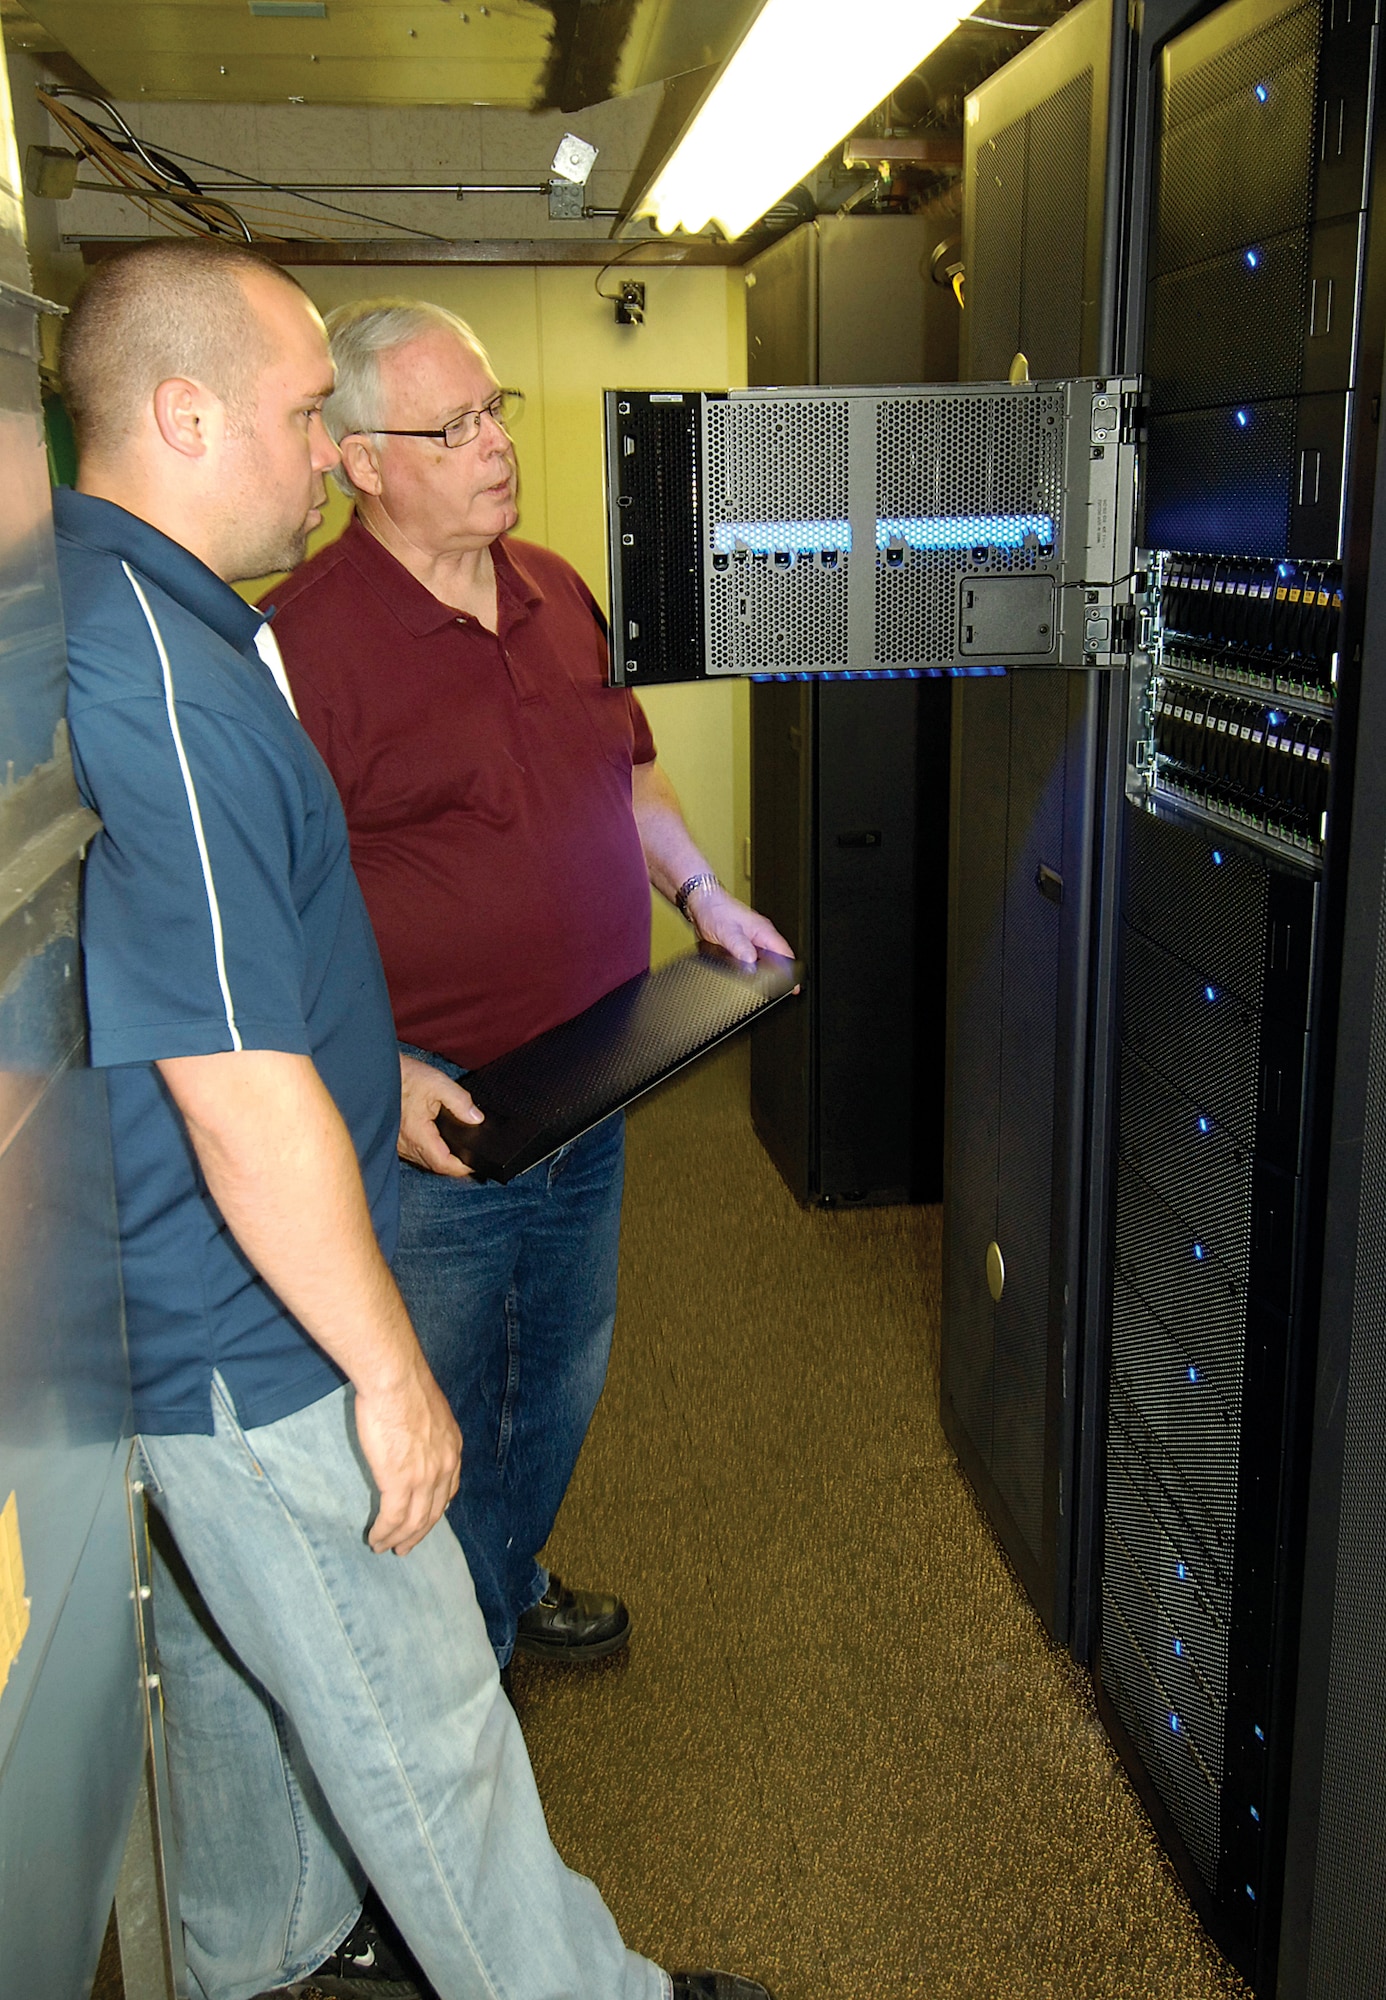 Darren Porter, left, and Hal Sultzbach, both storage area network administrators in the 72nd Air Base Wing Communications Directorate, look at a new system in the Data Center that is saving space and money plus increasing data storage efficiency for thousands of Tinker personnel.  At two-feet wide, roughly half the size of its predecessor, the storage system still holds more information but takes up less space and uses less electricity.  According to Mr. Sultzbach, after the new system was installed, energy consumption was nearly cut in half. (Air Force photo by Margo Wright)